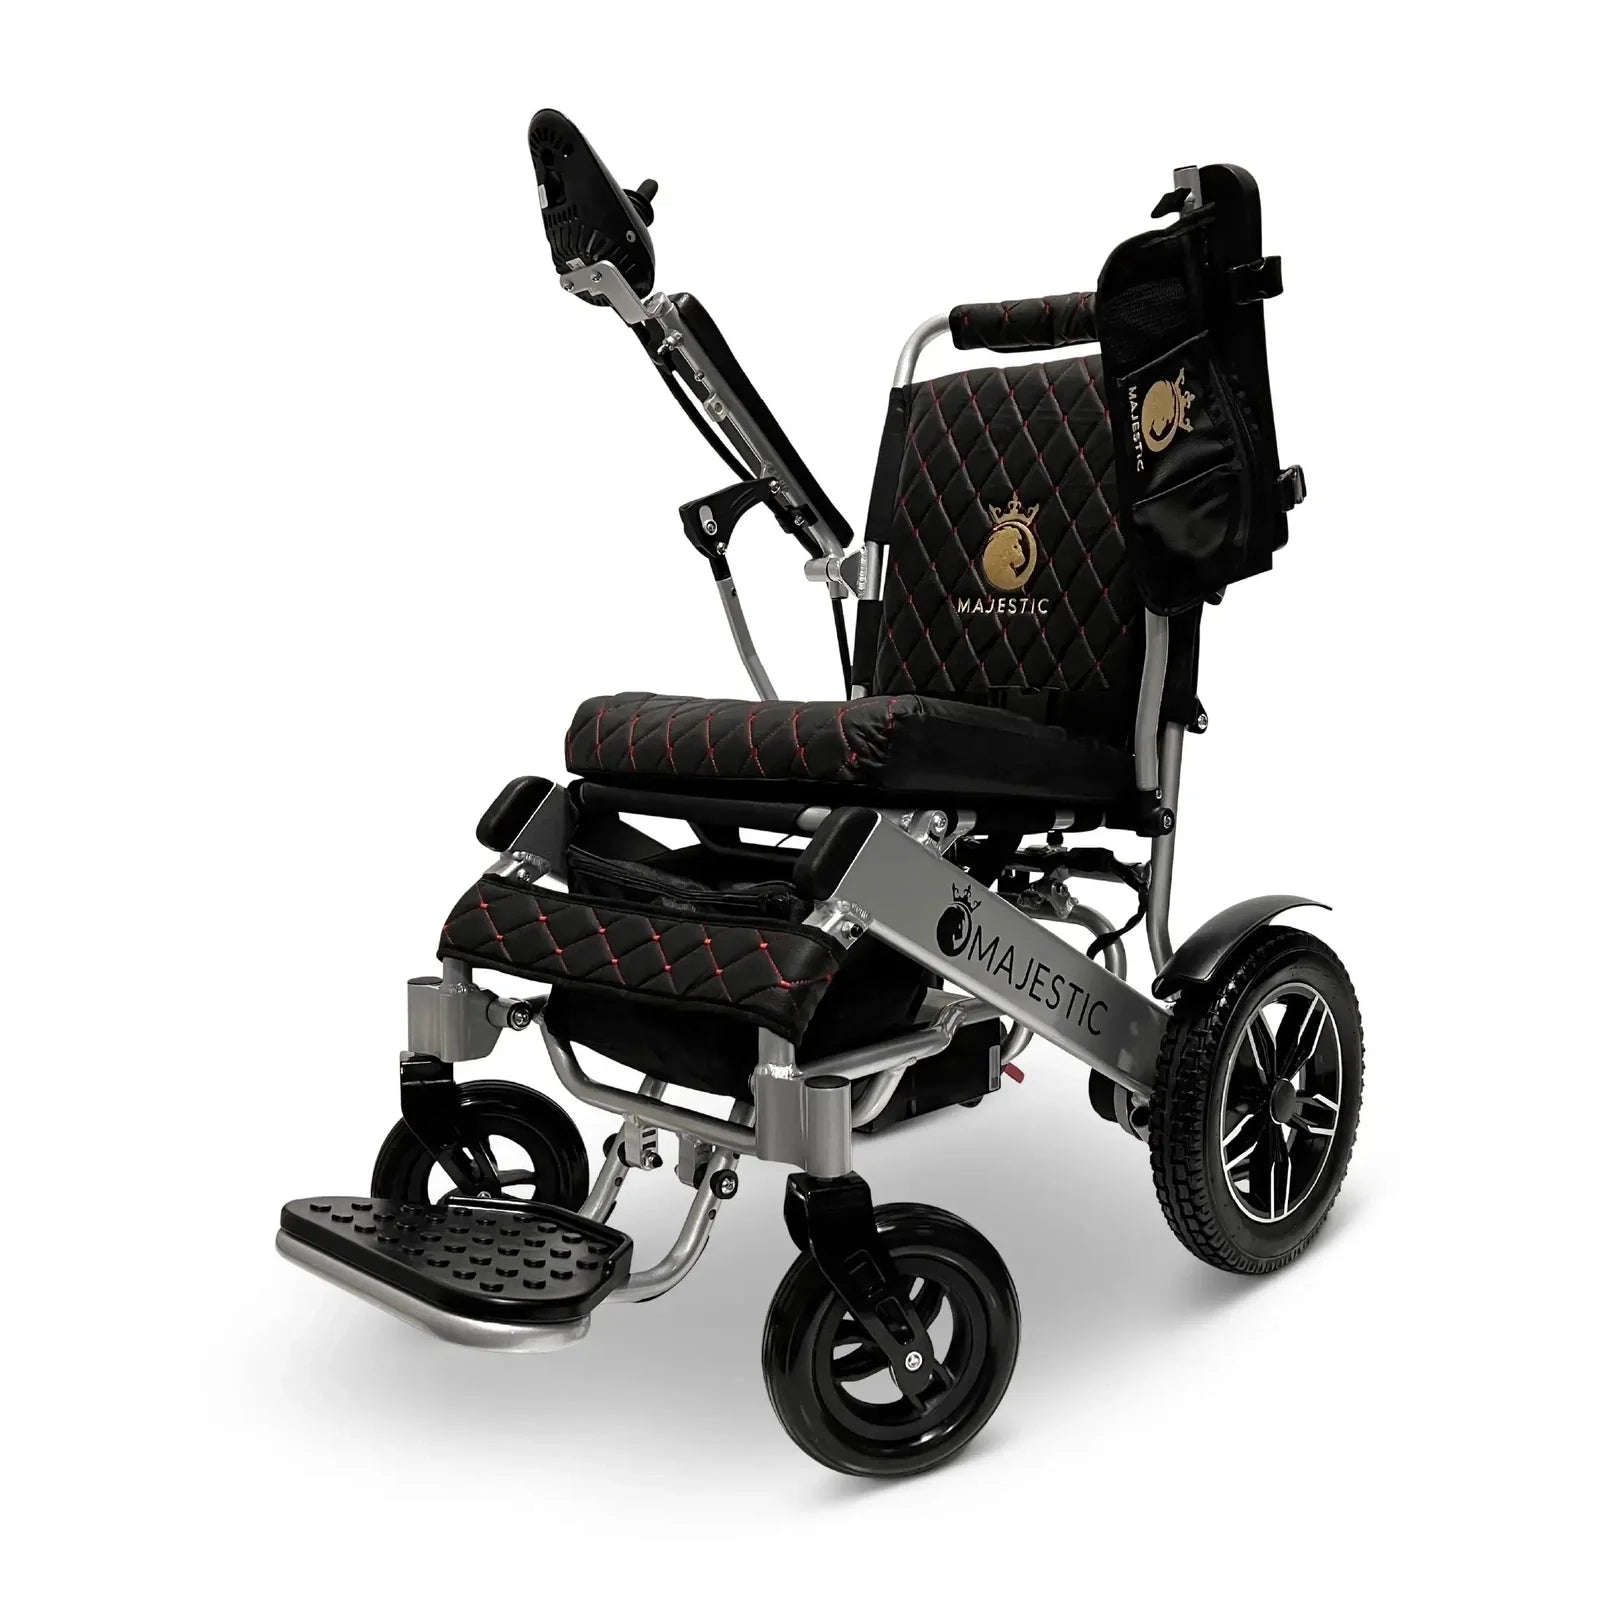 ComfyGO Majestic IQ-8000 Remote Controlled Lightweight Folding Electric Wheelchair Power Wheelchairs ComfyGO Silver Black 10 Miles & 17.5" Seat Width